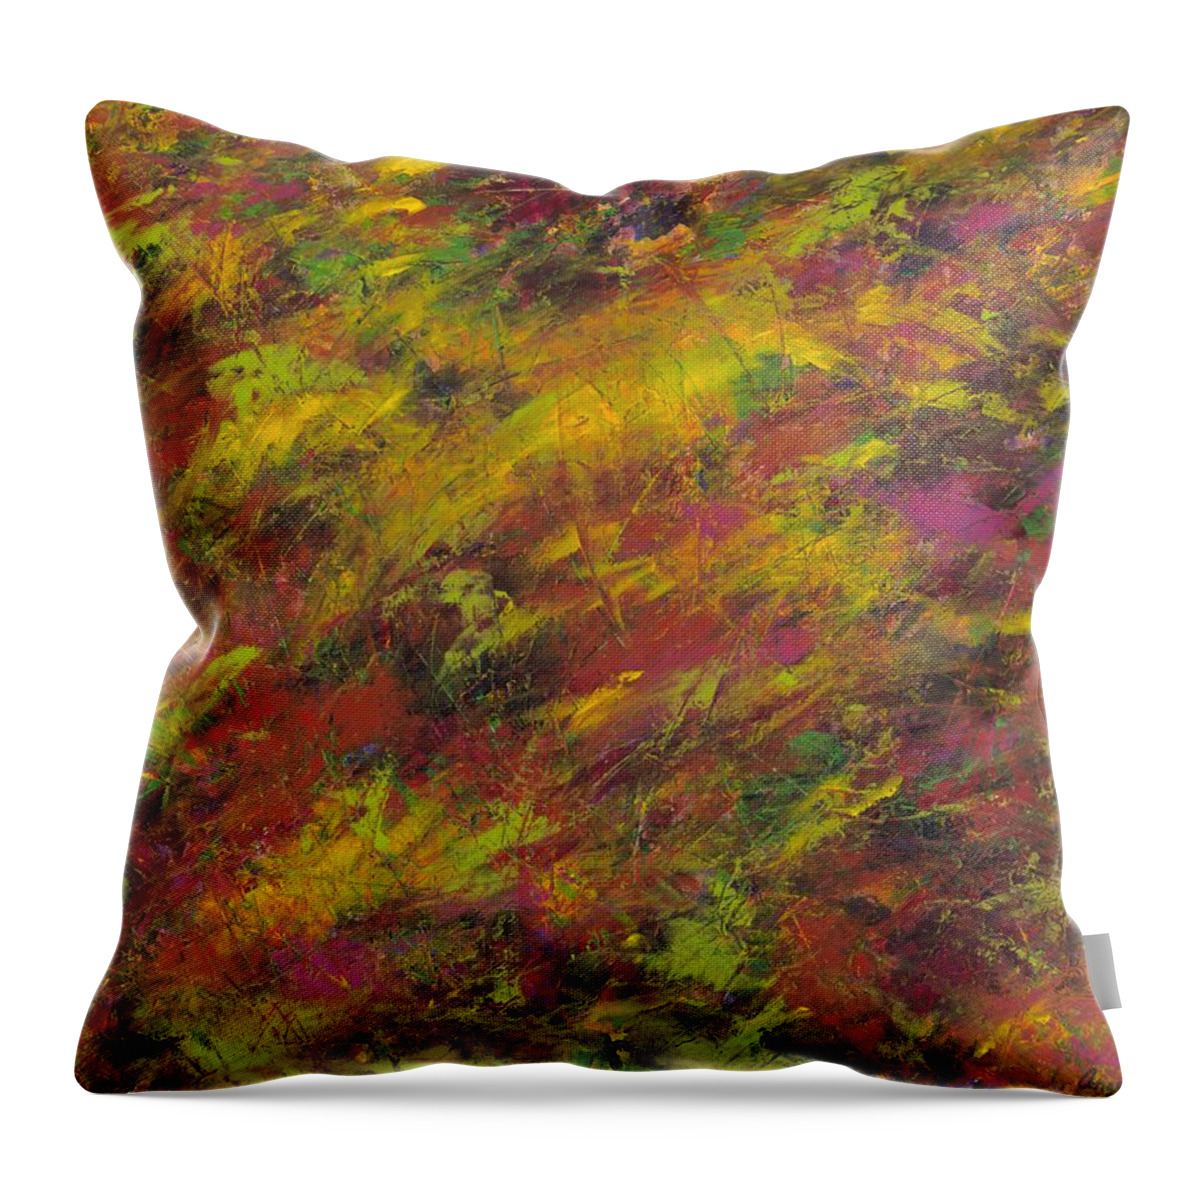 Healing Throw Pillow featuring the painting Infinity by Angela Bushman